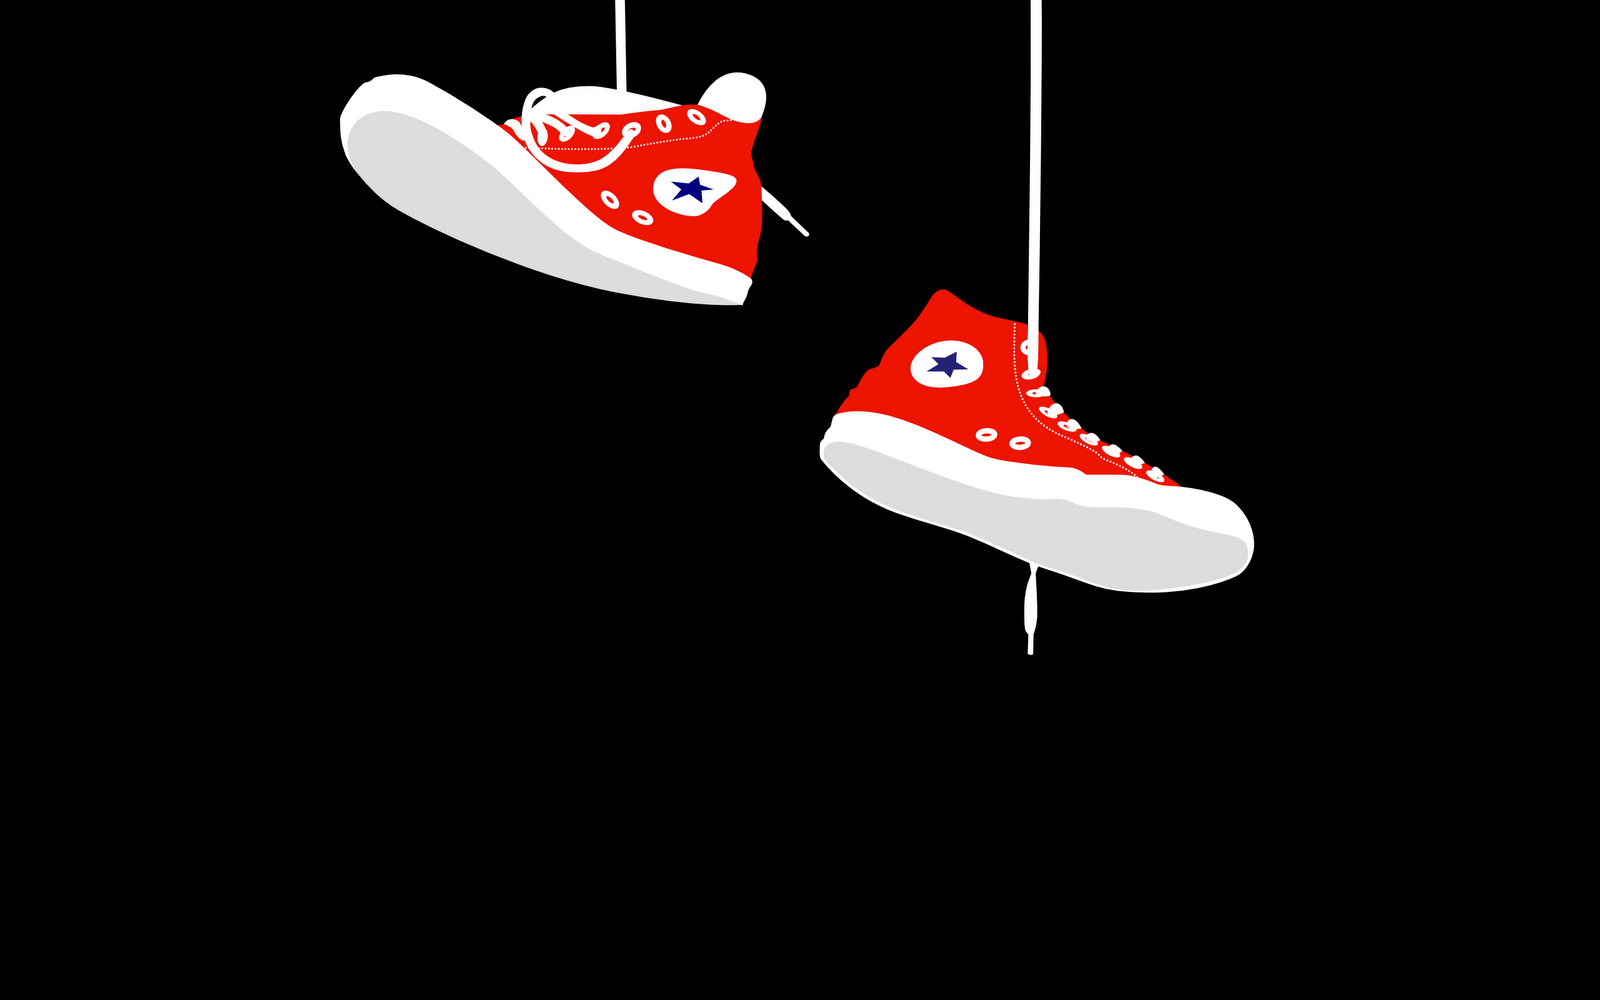 Converse All Star HD Logo Wallpapers Download Free Wallpapers in HD